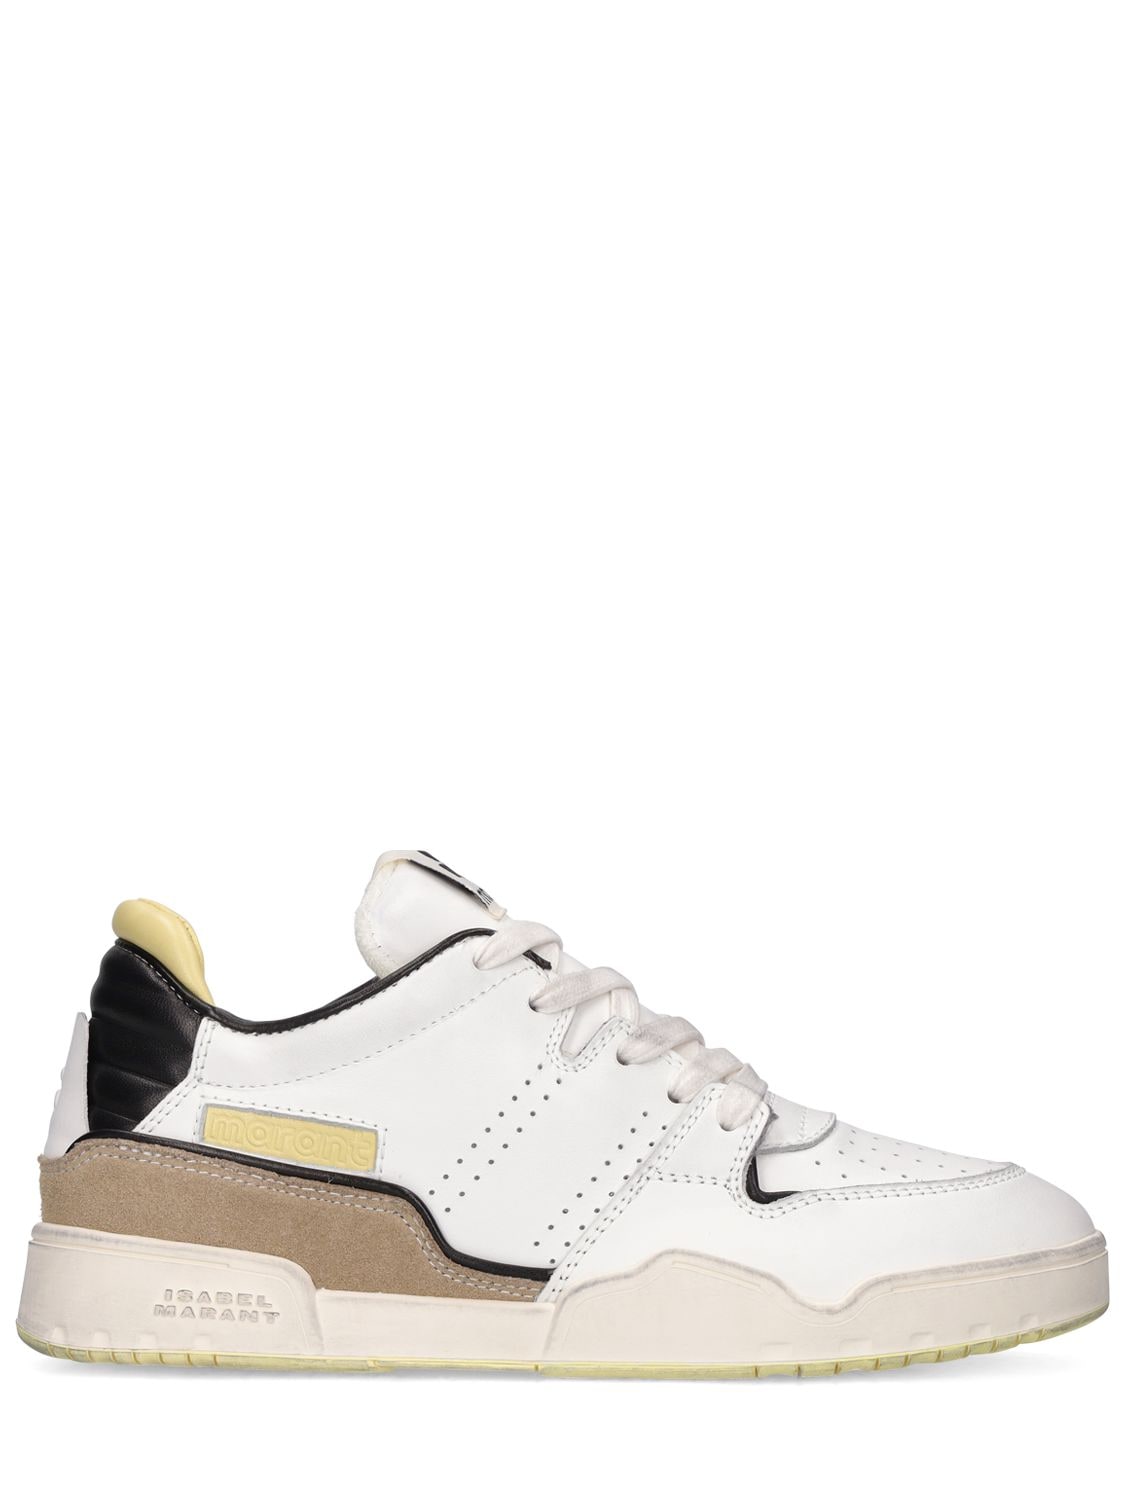 ISABEL MARANT 10MM EMREE LEATHER SNEAKERS